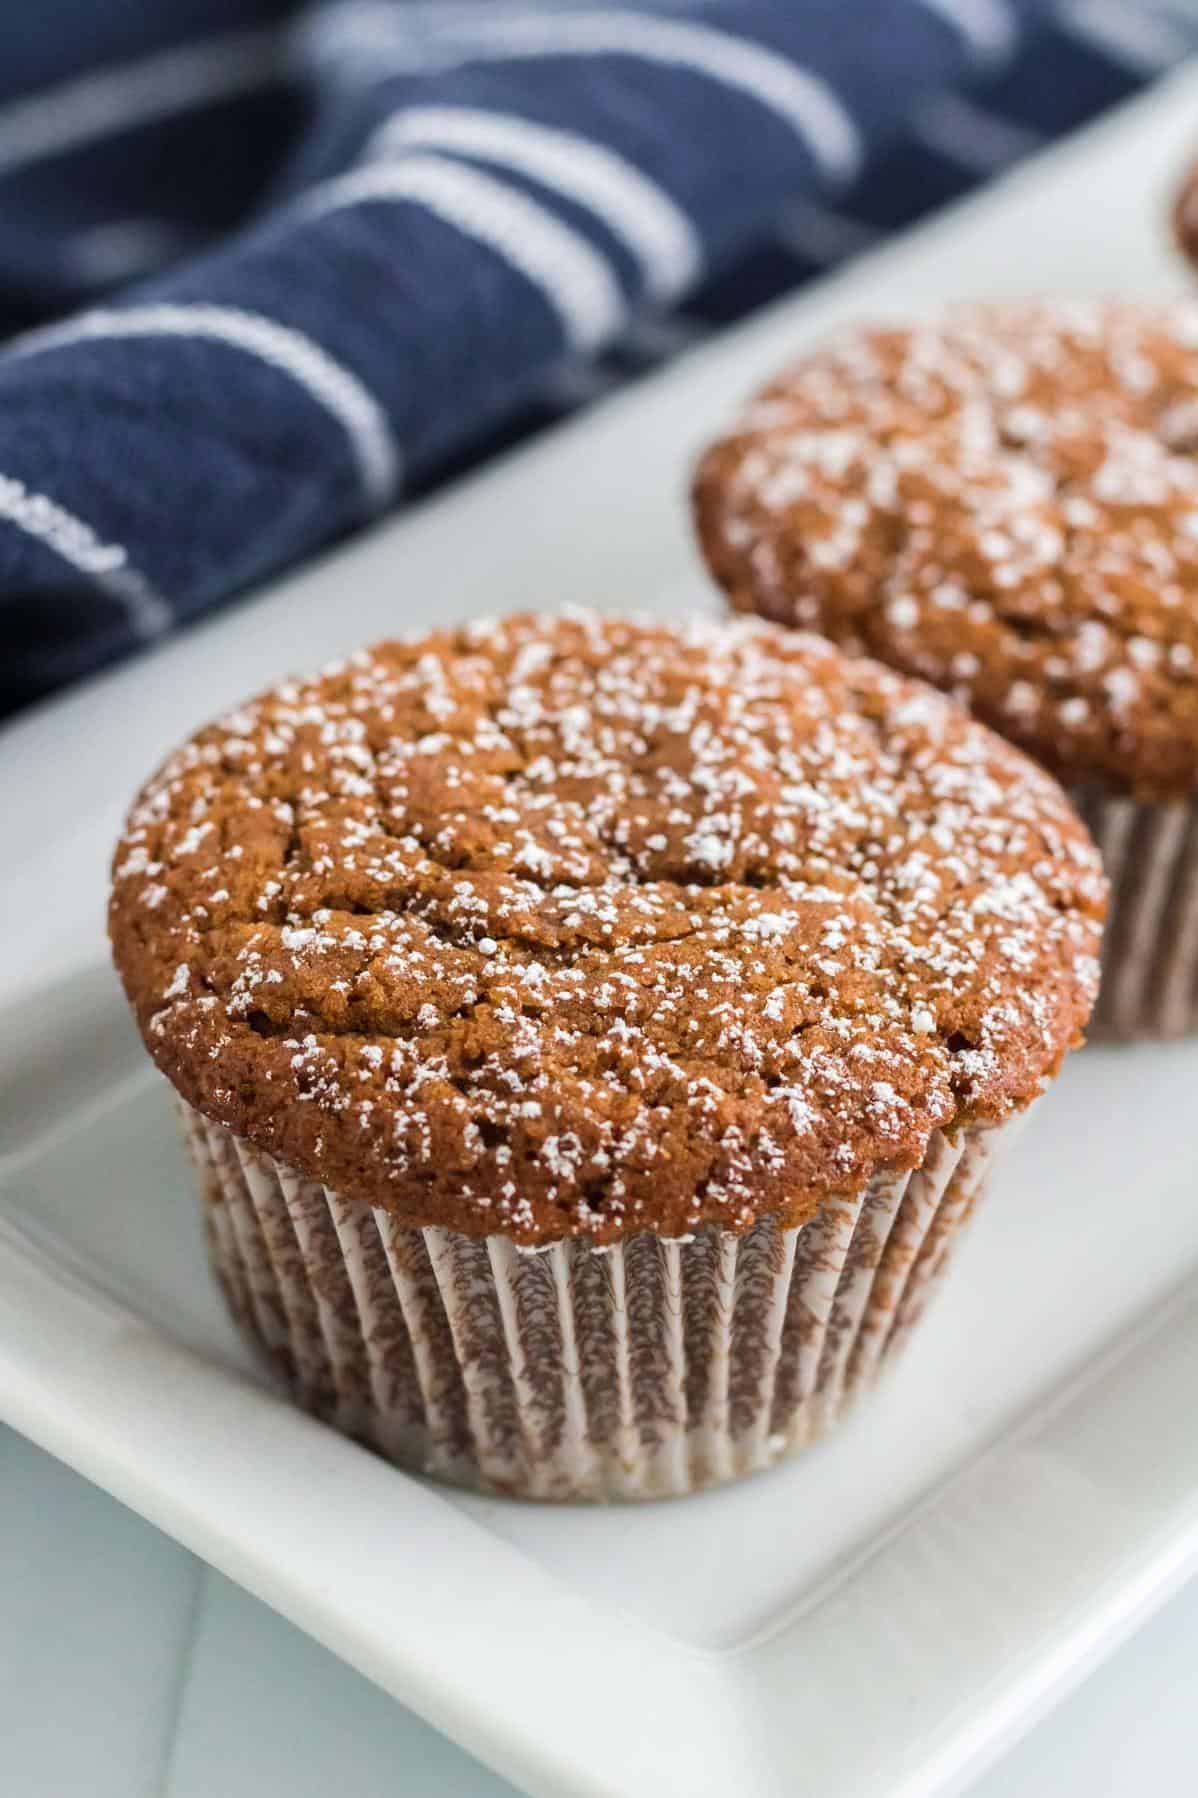  These muffins are the ultimate grab-and-go breakfast that packs all the flavors of the holiday season.